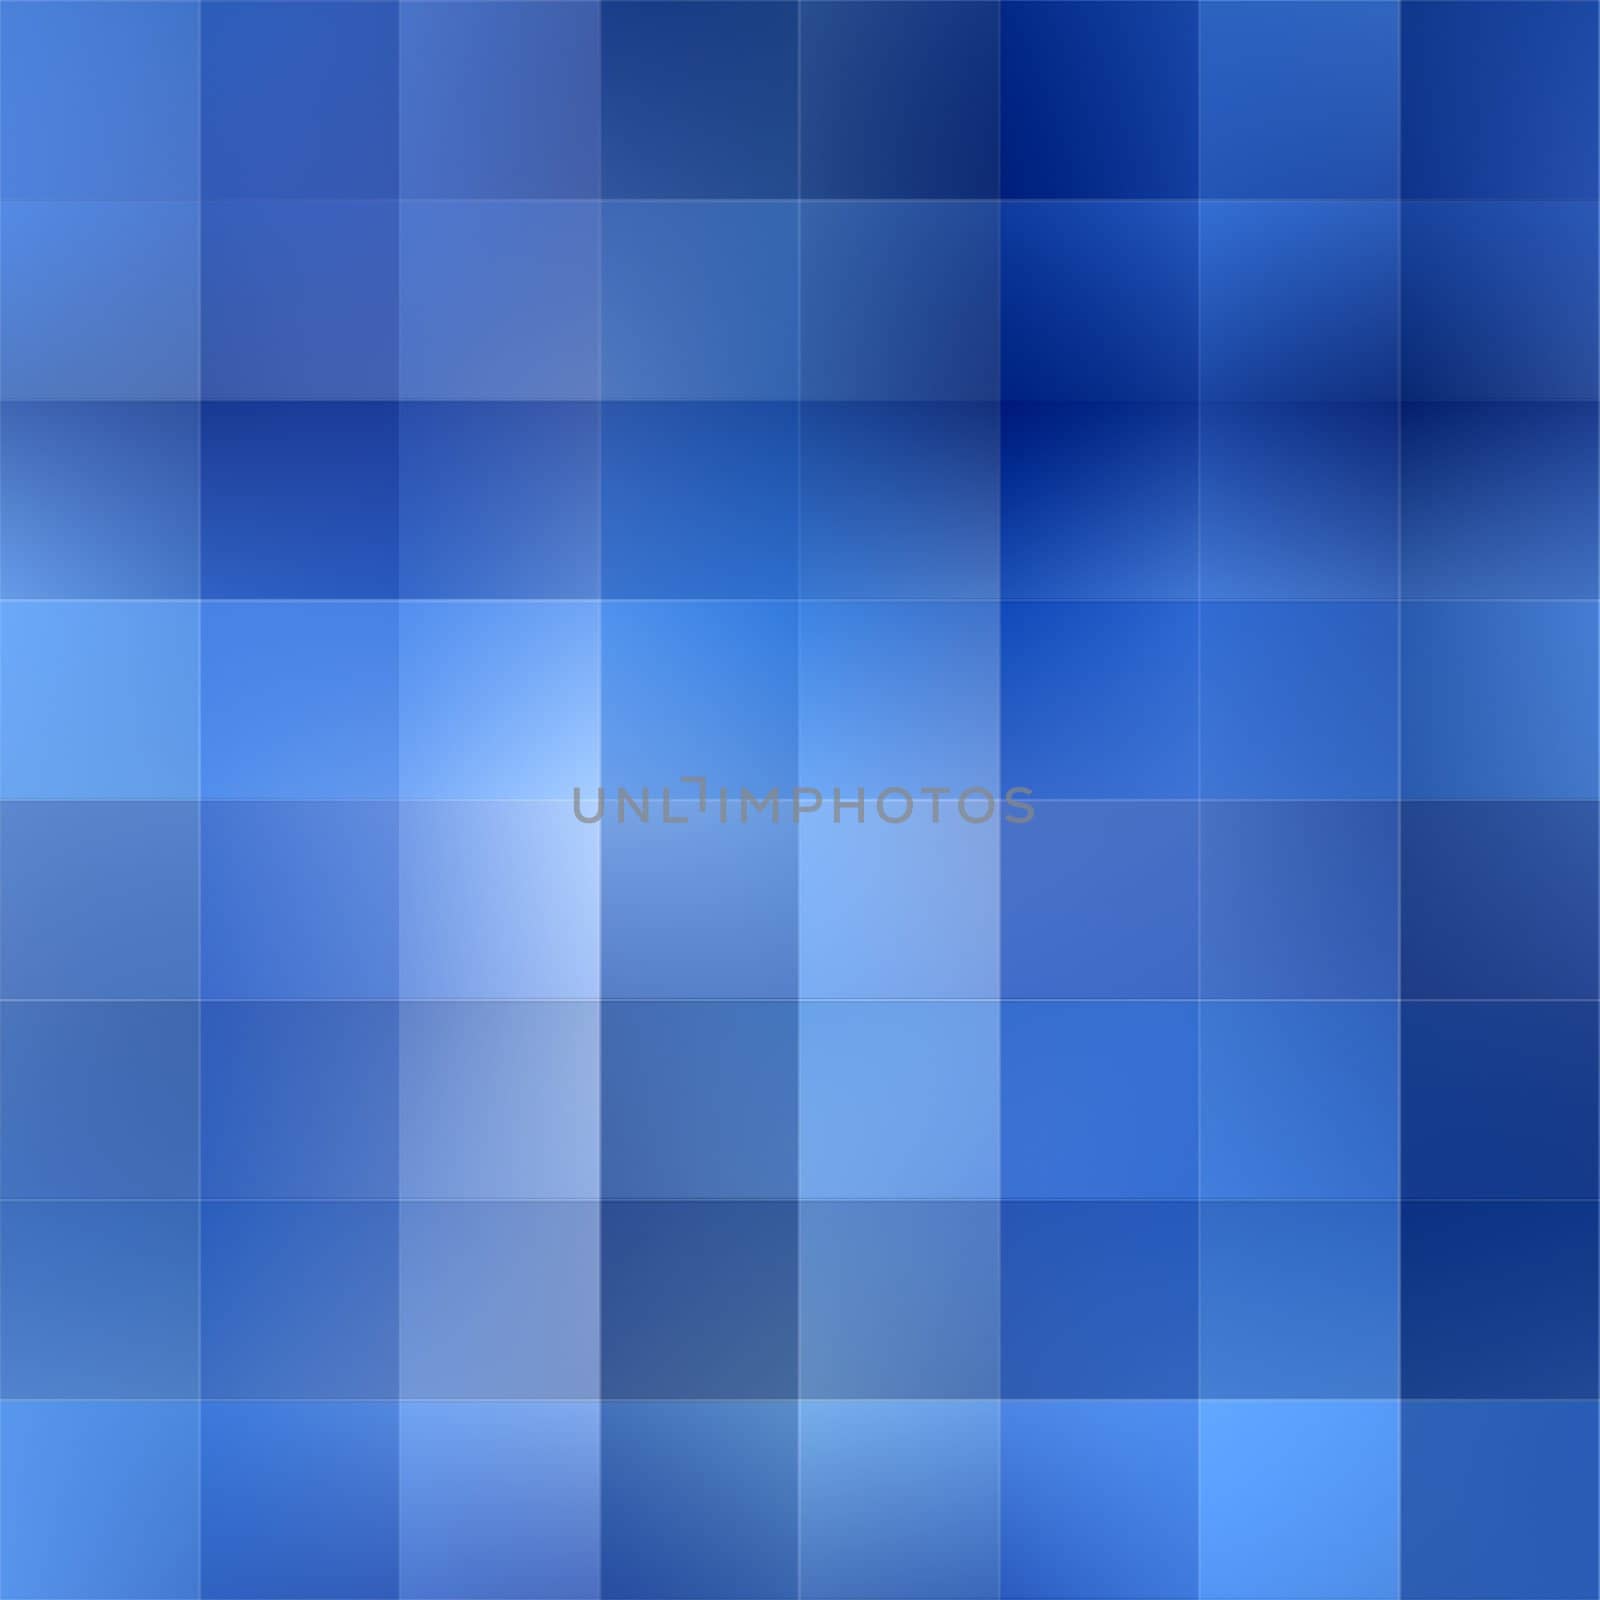 texture of squares in different cool blue colors